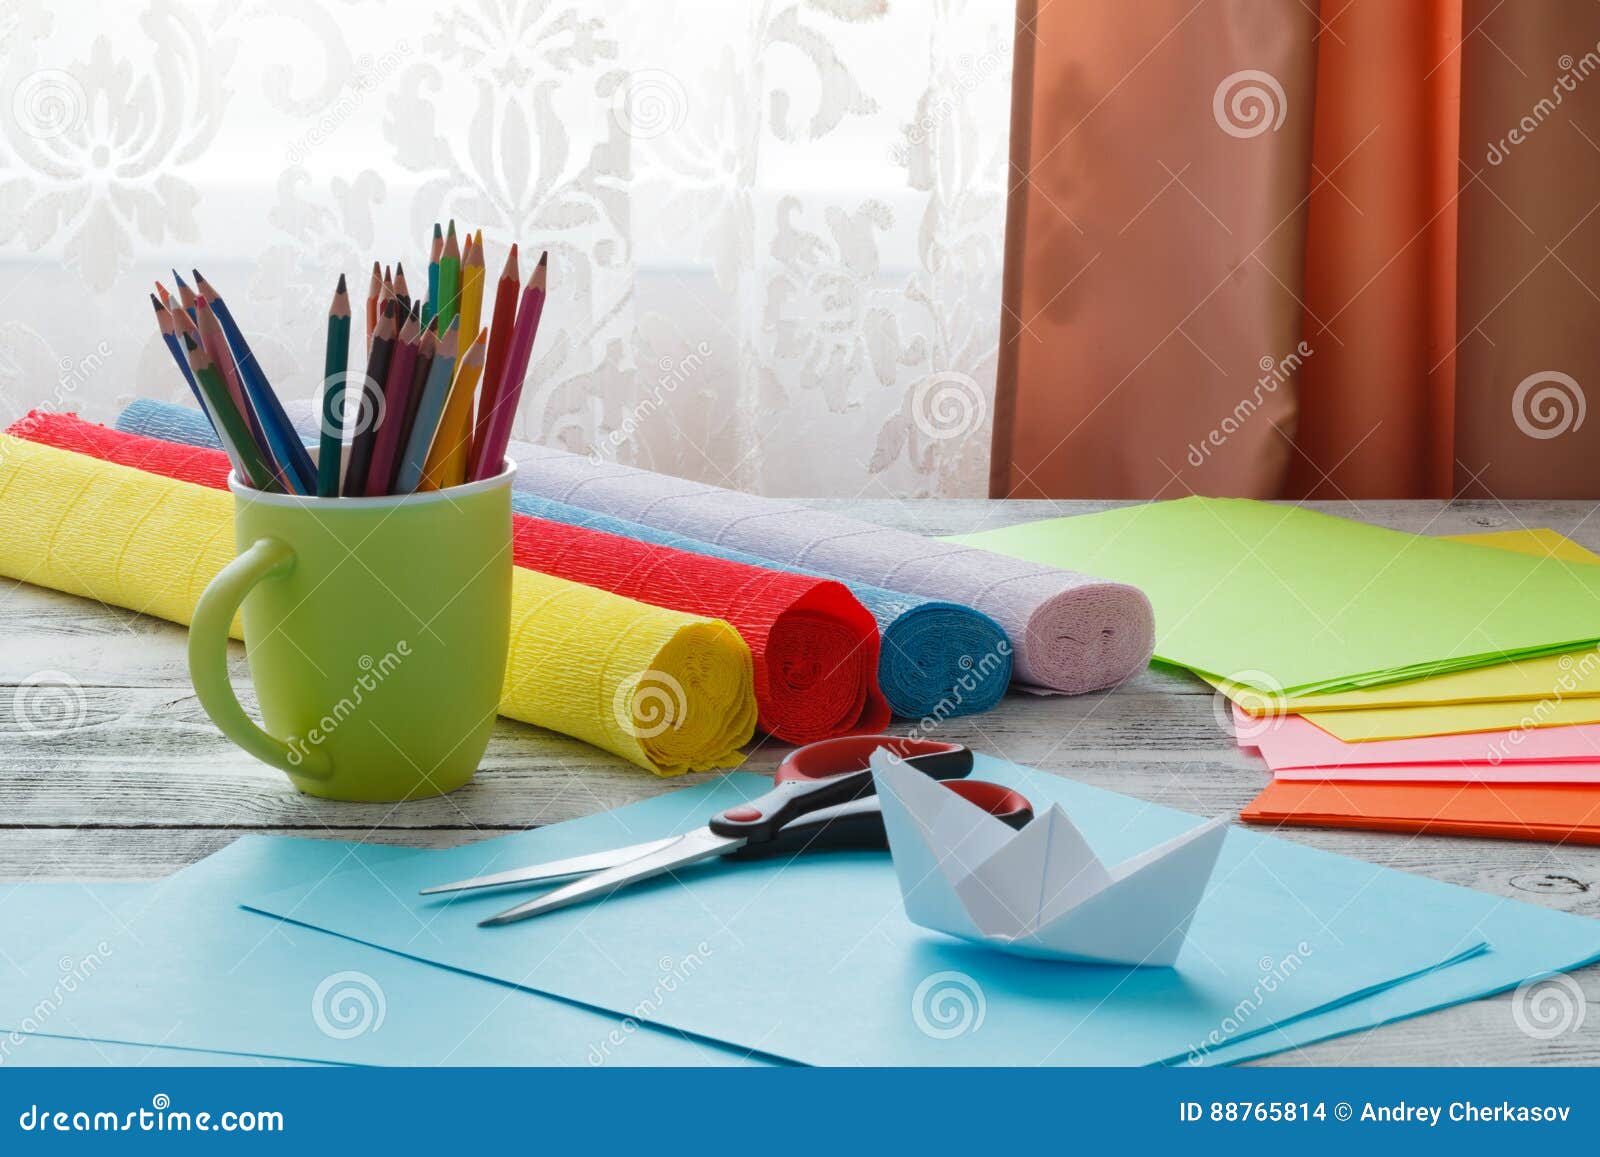 Set Of Origami Boats And Square Sheets Of Colored Paper On A